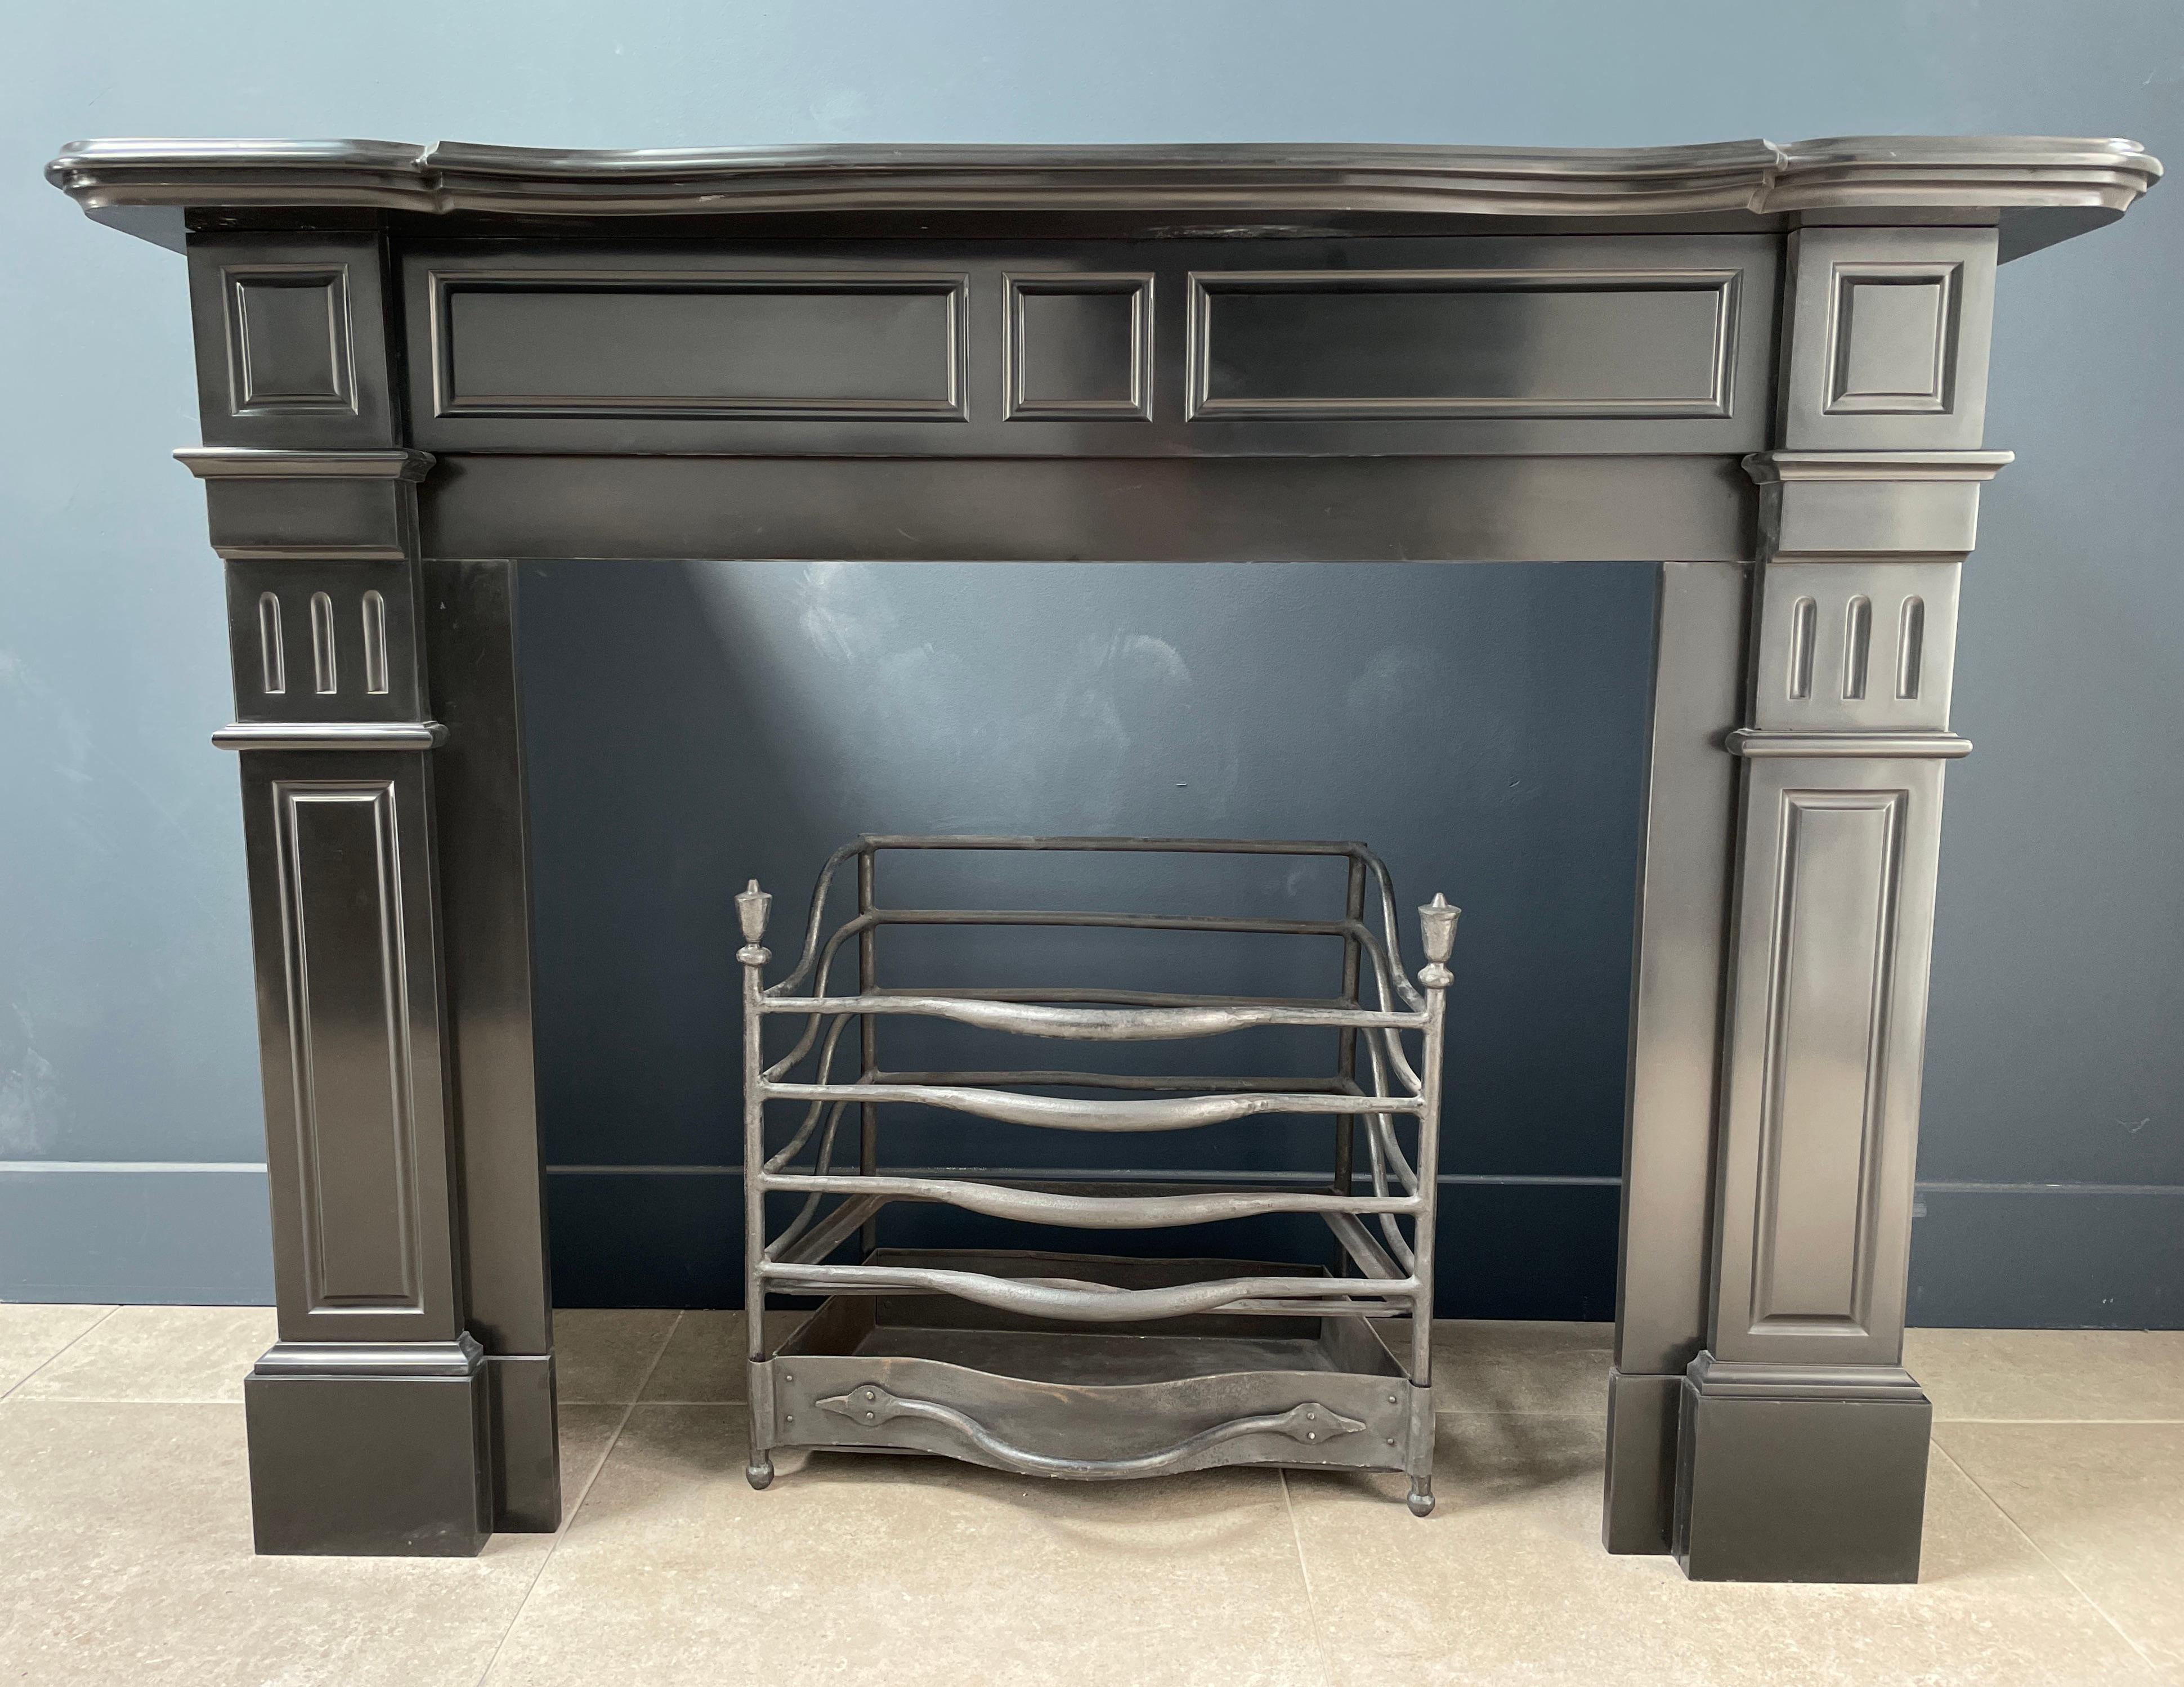 Beautifully Restored Antique Black circular fireplace. With its clean lines and deep shine, this fireplace is a top piece. The clean lines of the consoles are provided by the milling in the front. This fireplace has an extra luxurious top which, in